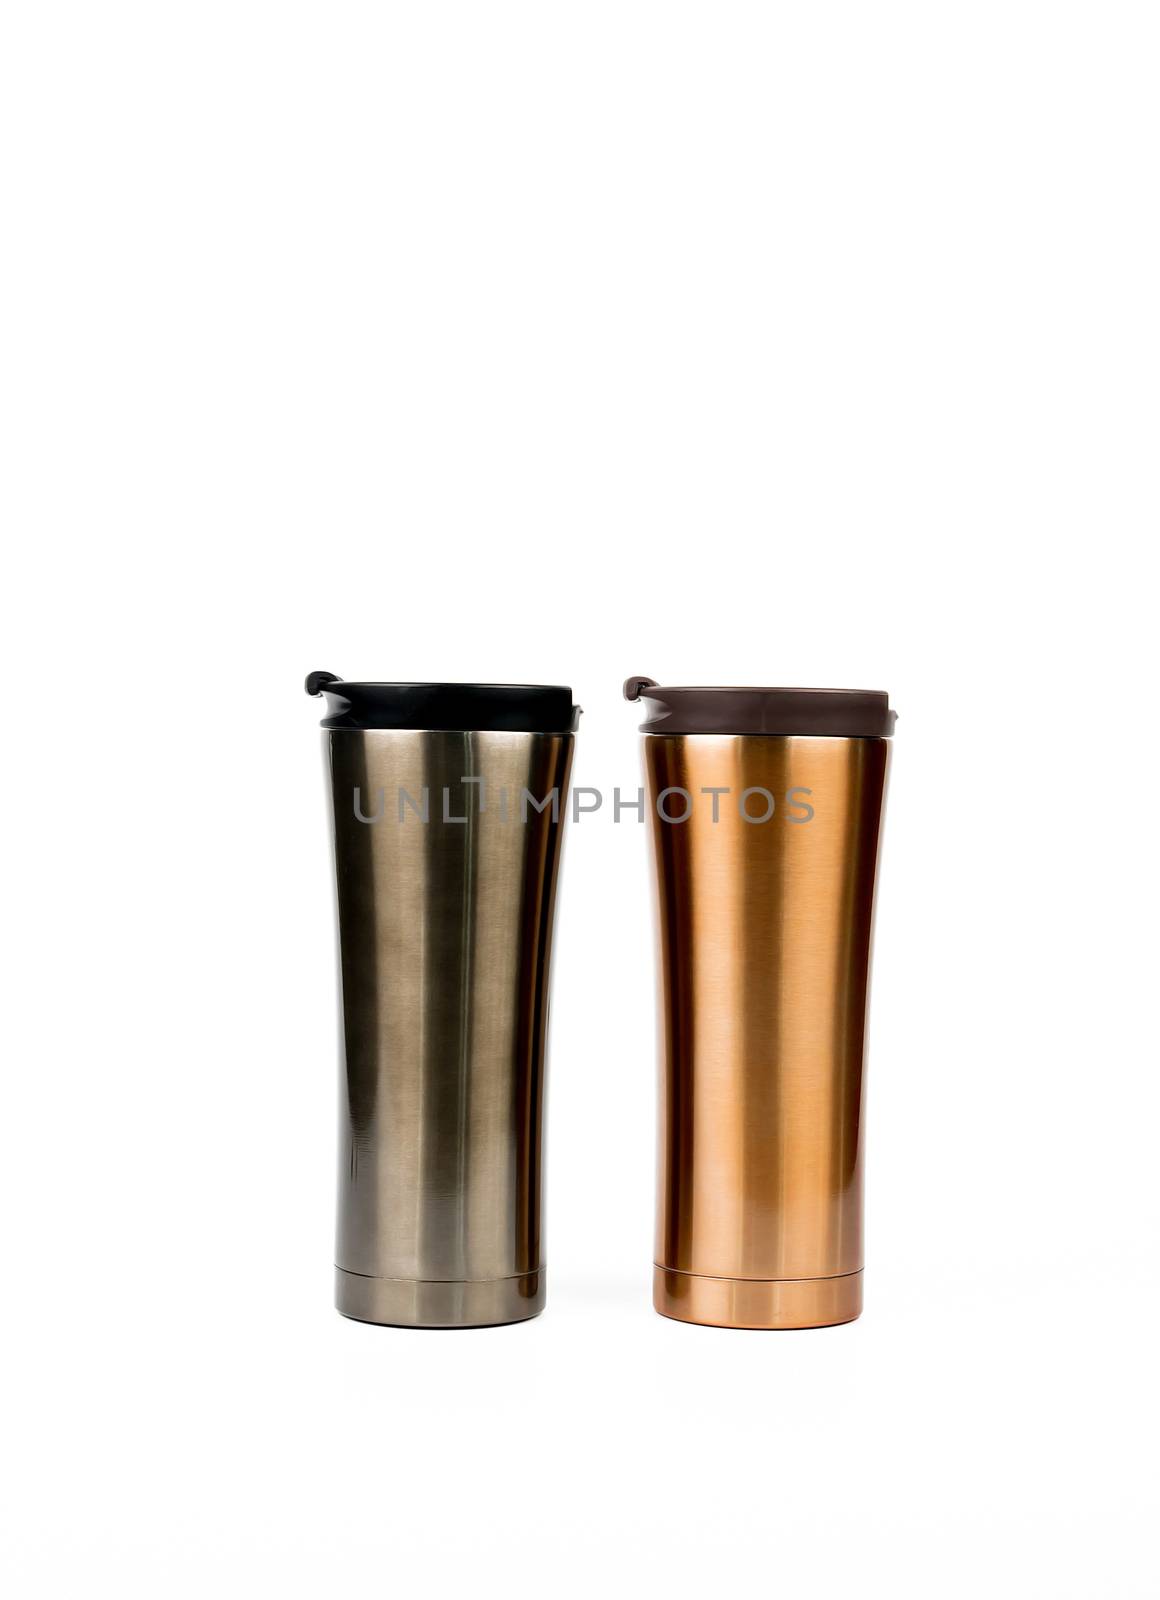 Silver and gold thermos bottle on white background with copy space by Fahroni